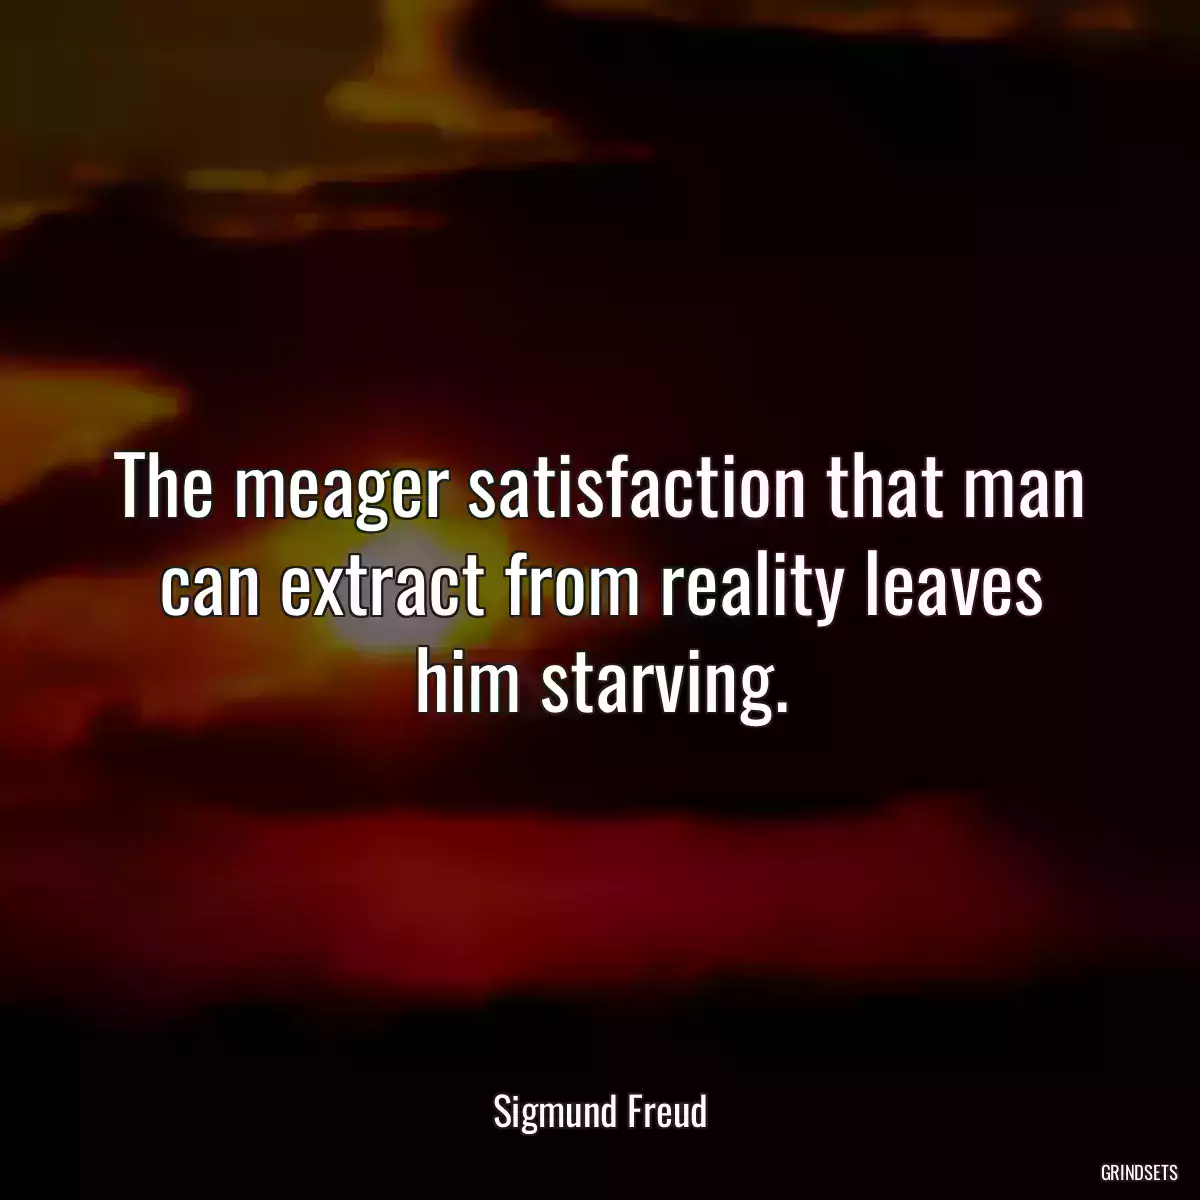 The meager satisfaction that man can extract from reality leaves him starving.